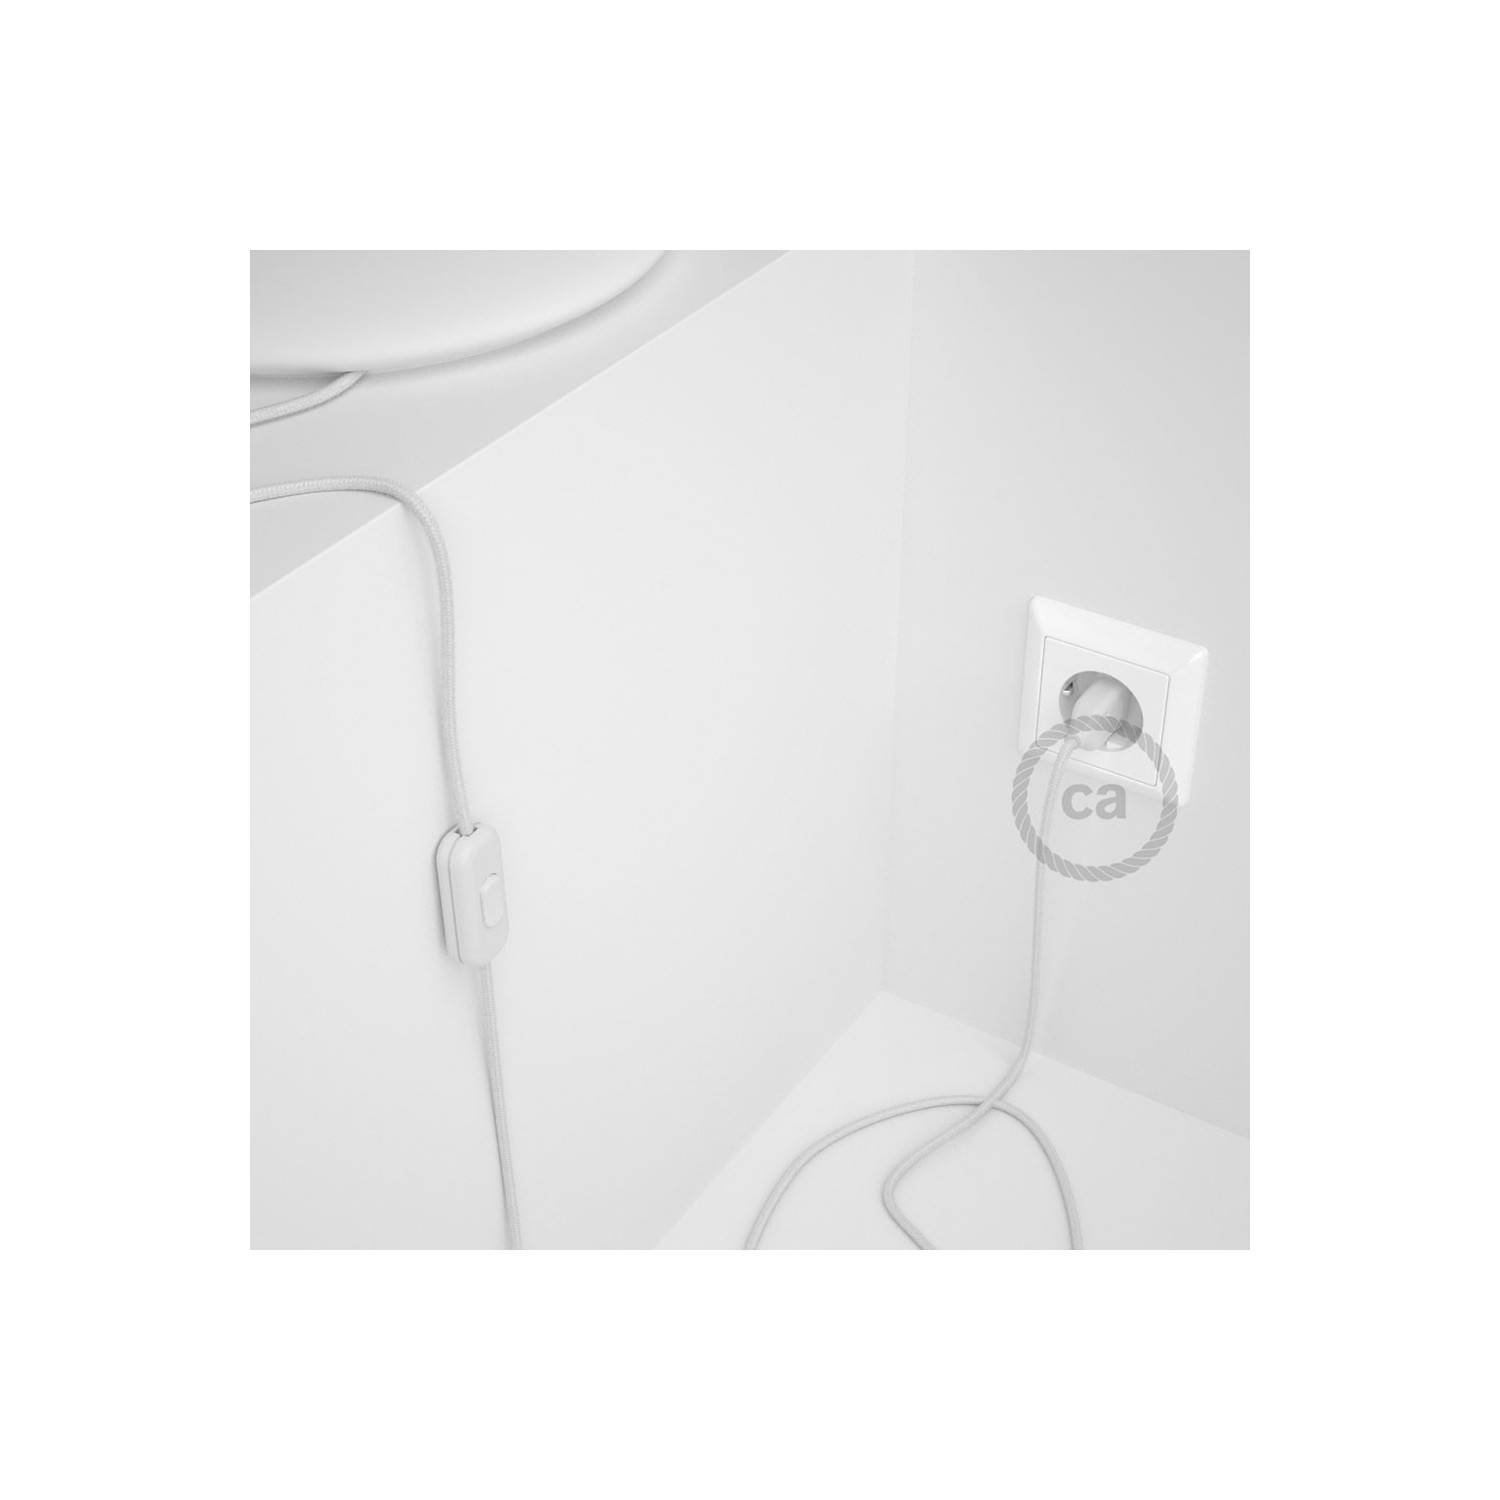 Lamp wiring, RC01 White Cotton 1,80 m. Choose the colour of the switch and plug.